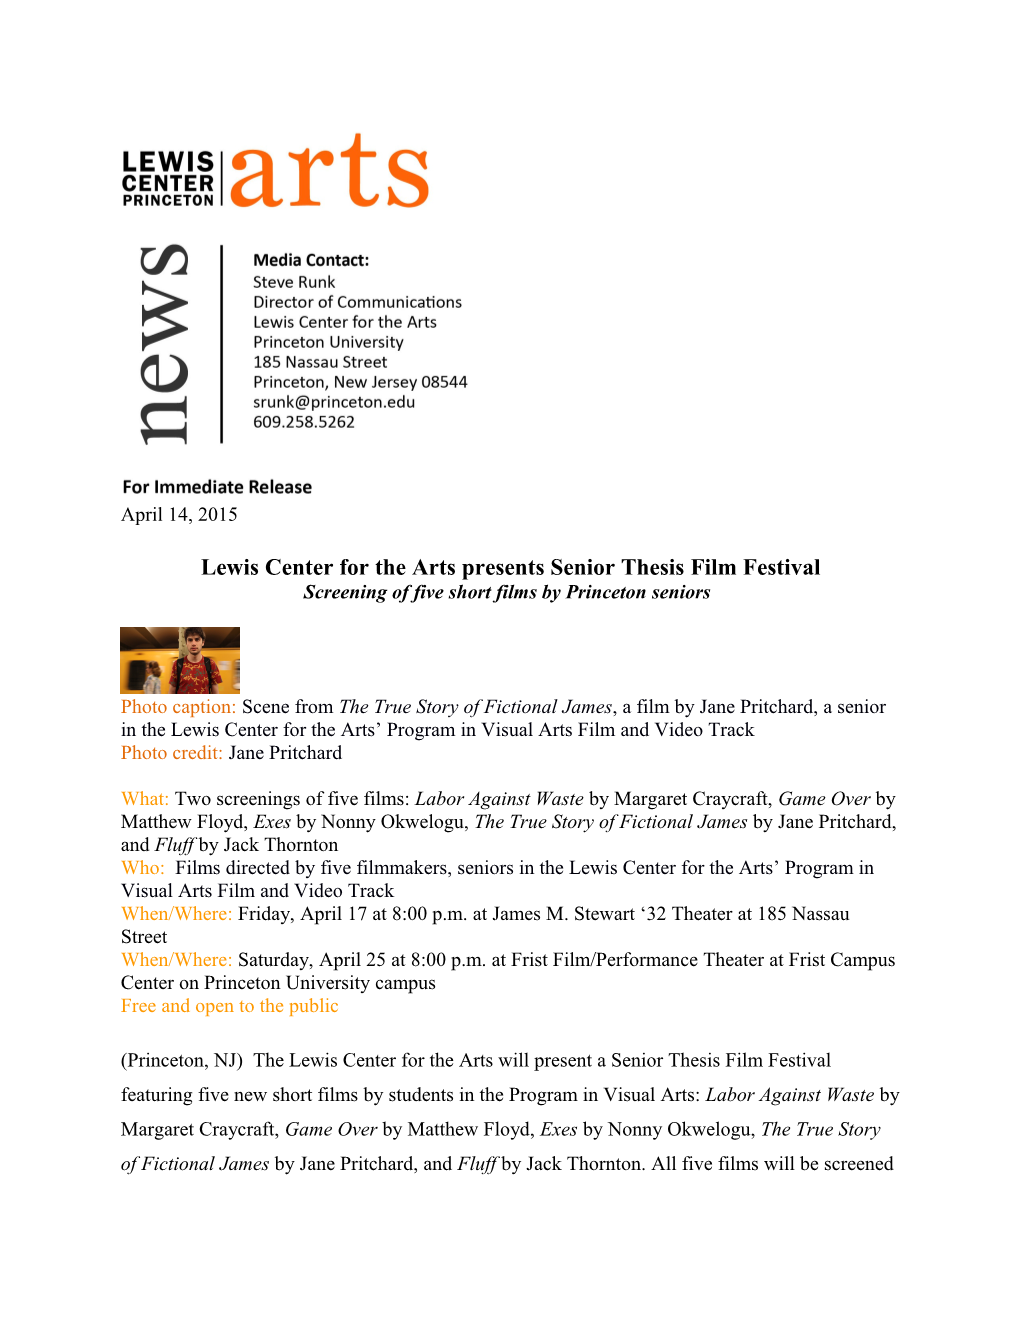 Lewis Center for the Arts Presents Senior Thesis Film Festival